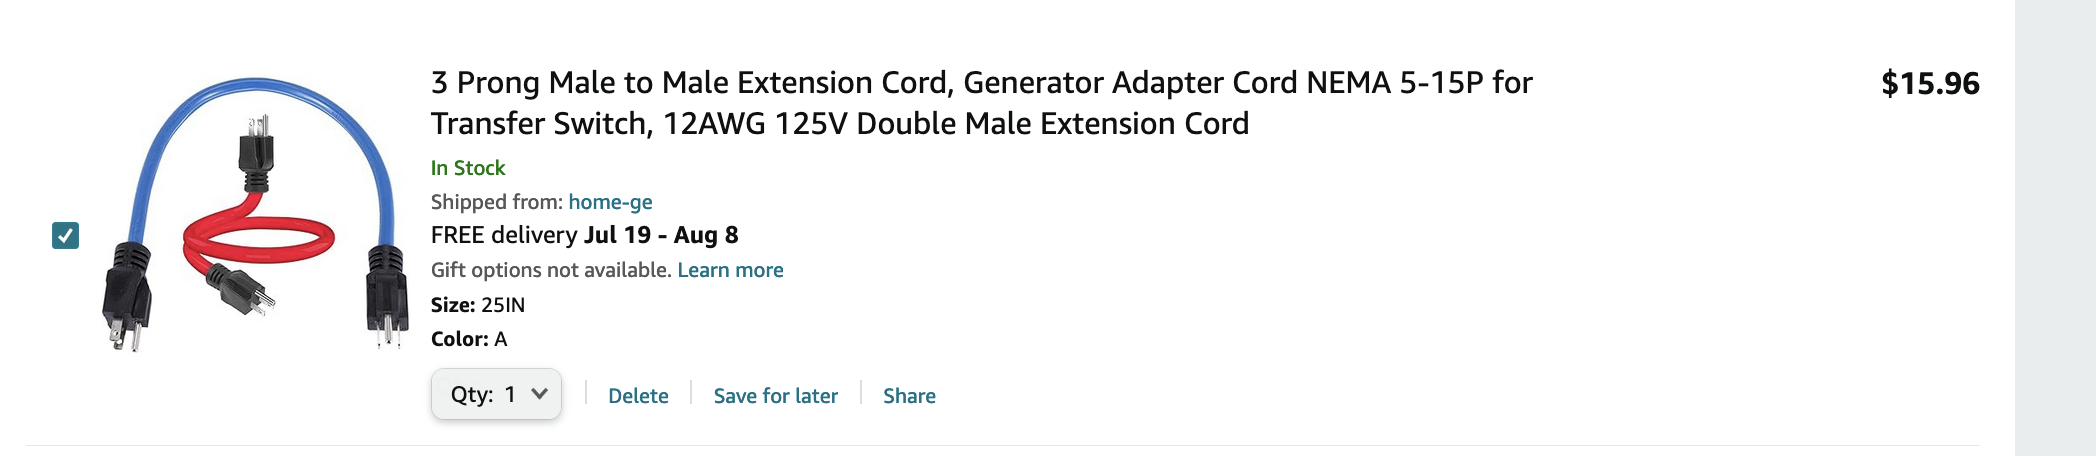 screenshot of item in amazon cart, one blue cable and one red cable in a bundle.